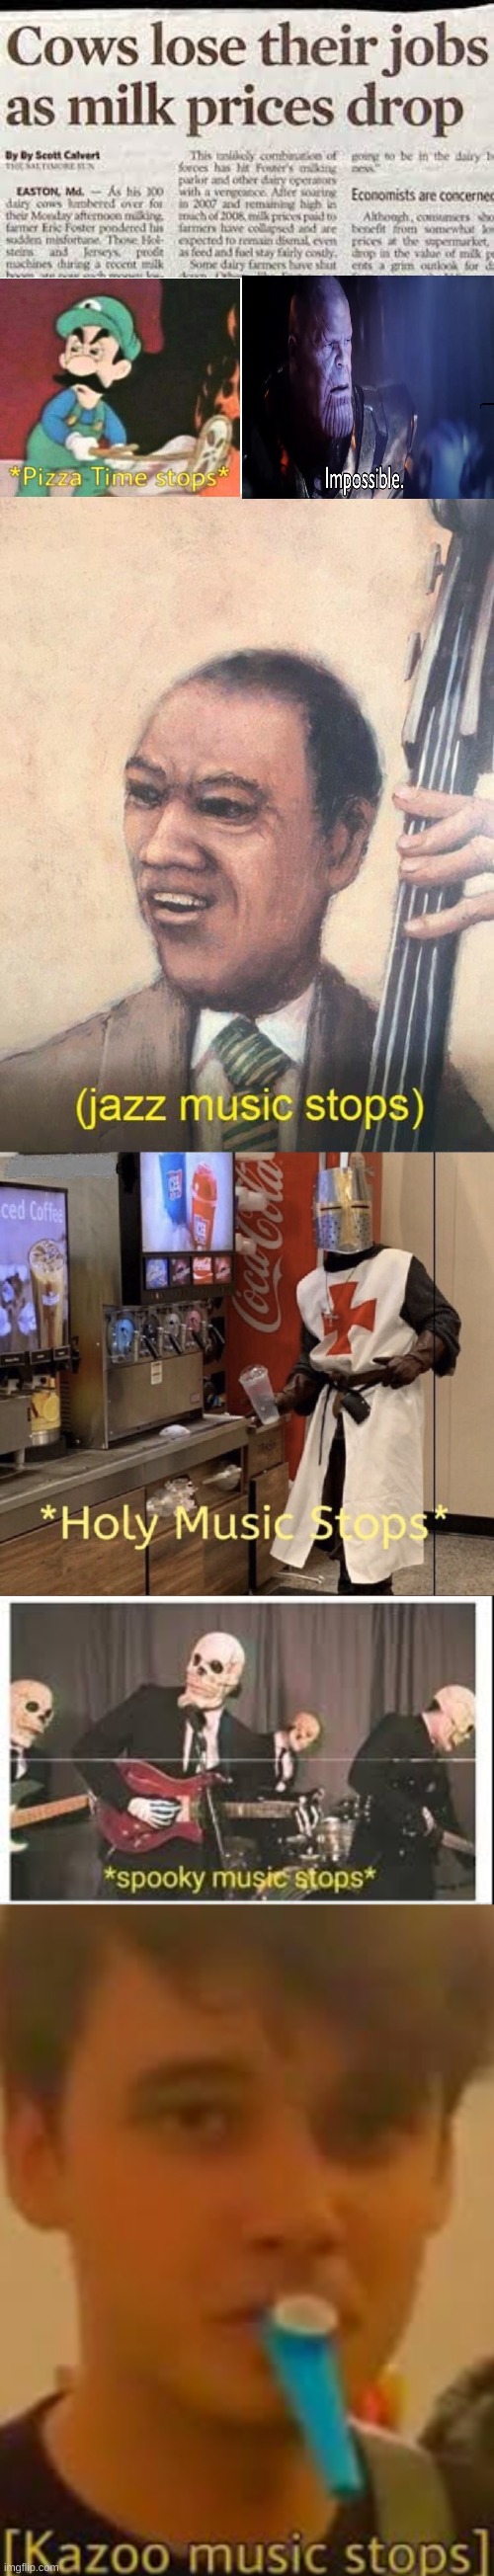 image tagged in memes,blank transparent square,jazz music stops,holy music stops,spooky music stops,kazoo music stops | made w/ Imgflip meme maker